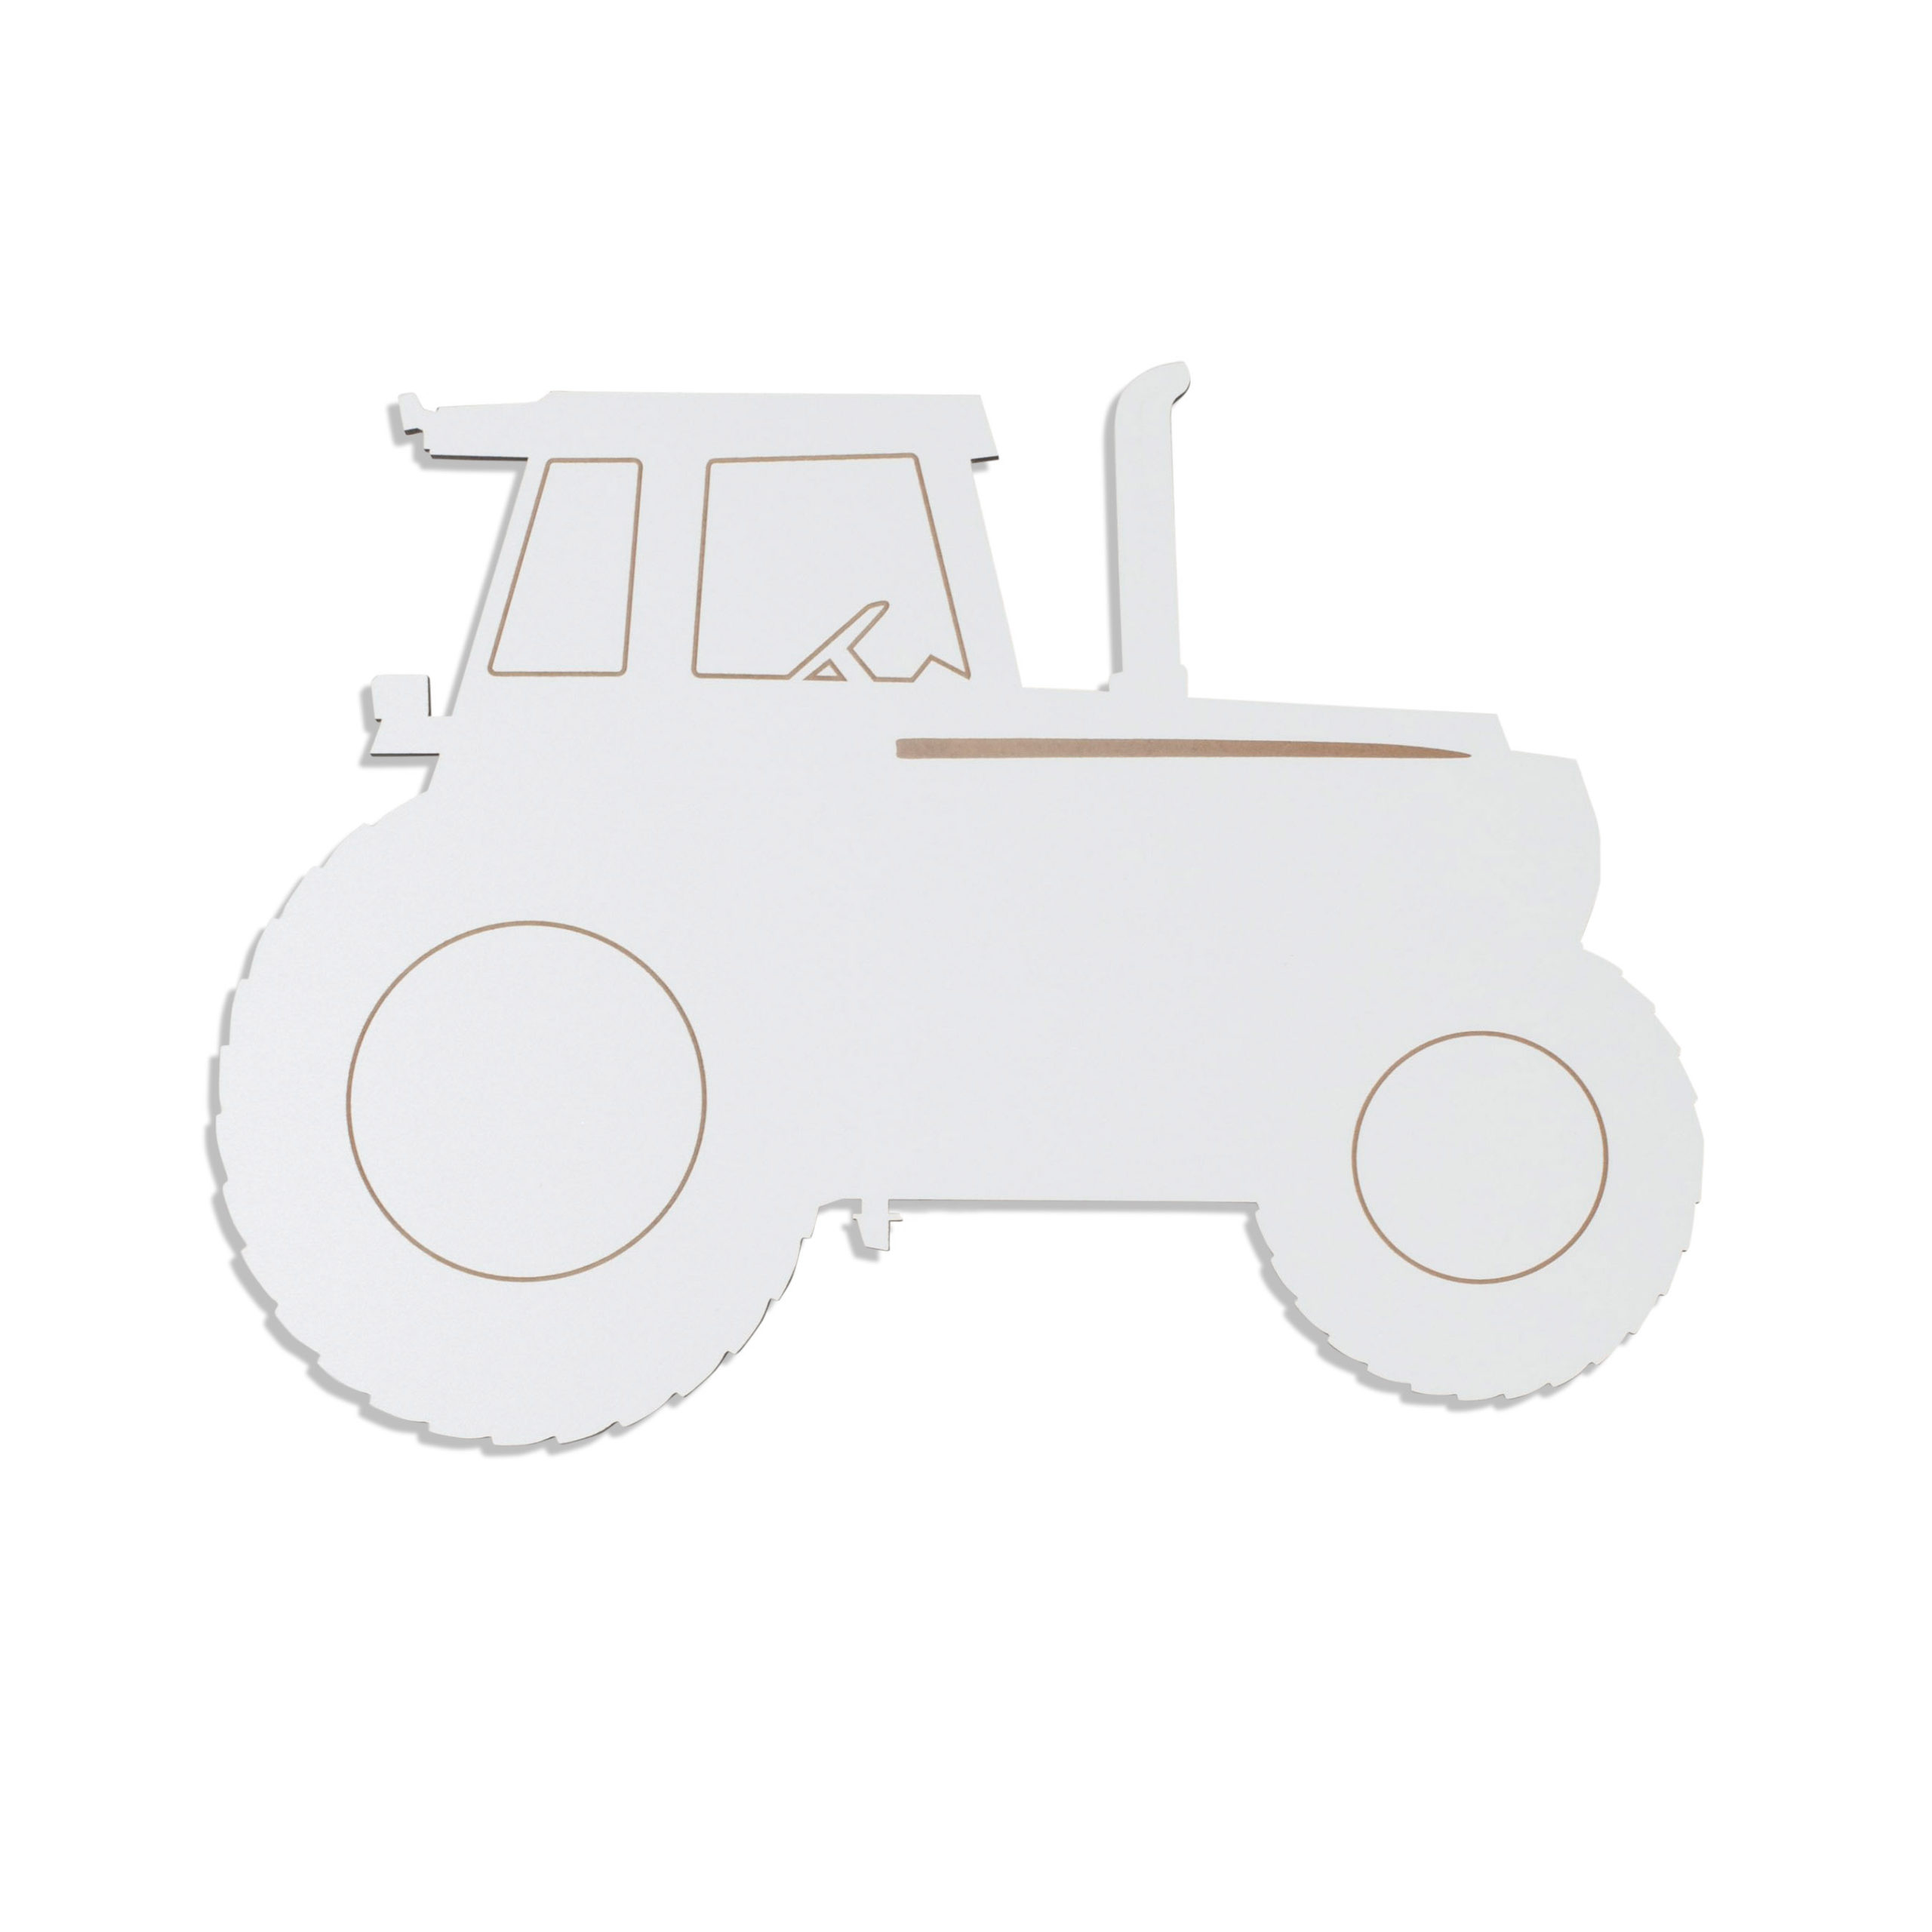 https://maseliving.dk/wp-content/uploads/2019/10/Tractor-lamp-white-01-scaled.jpg